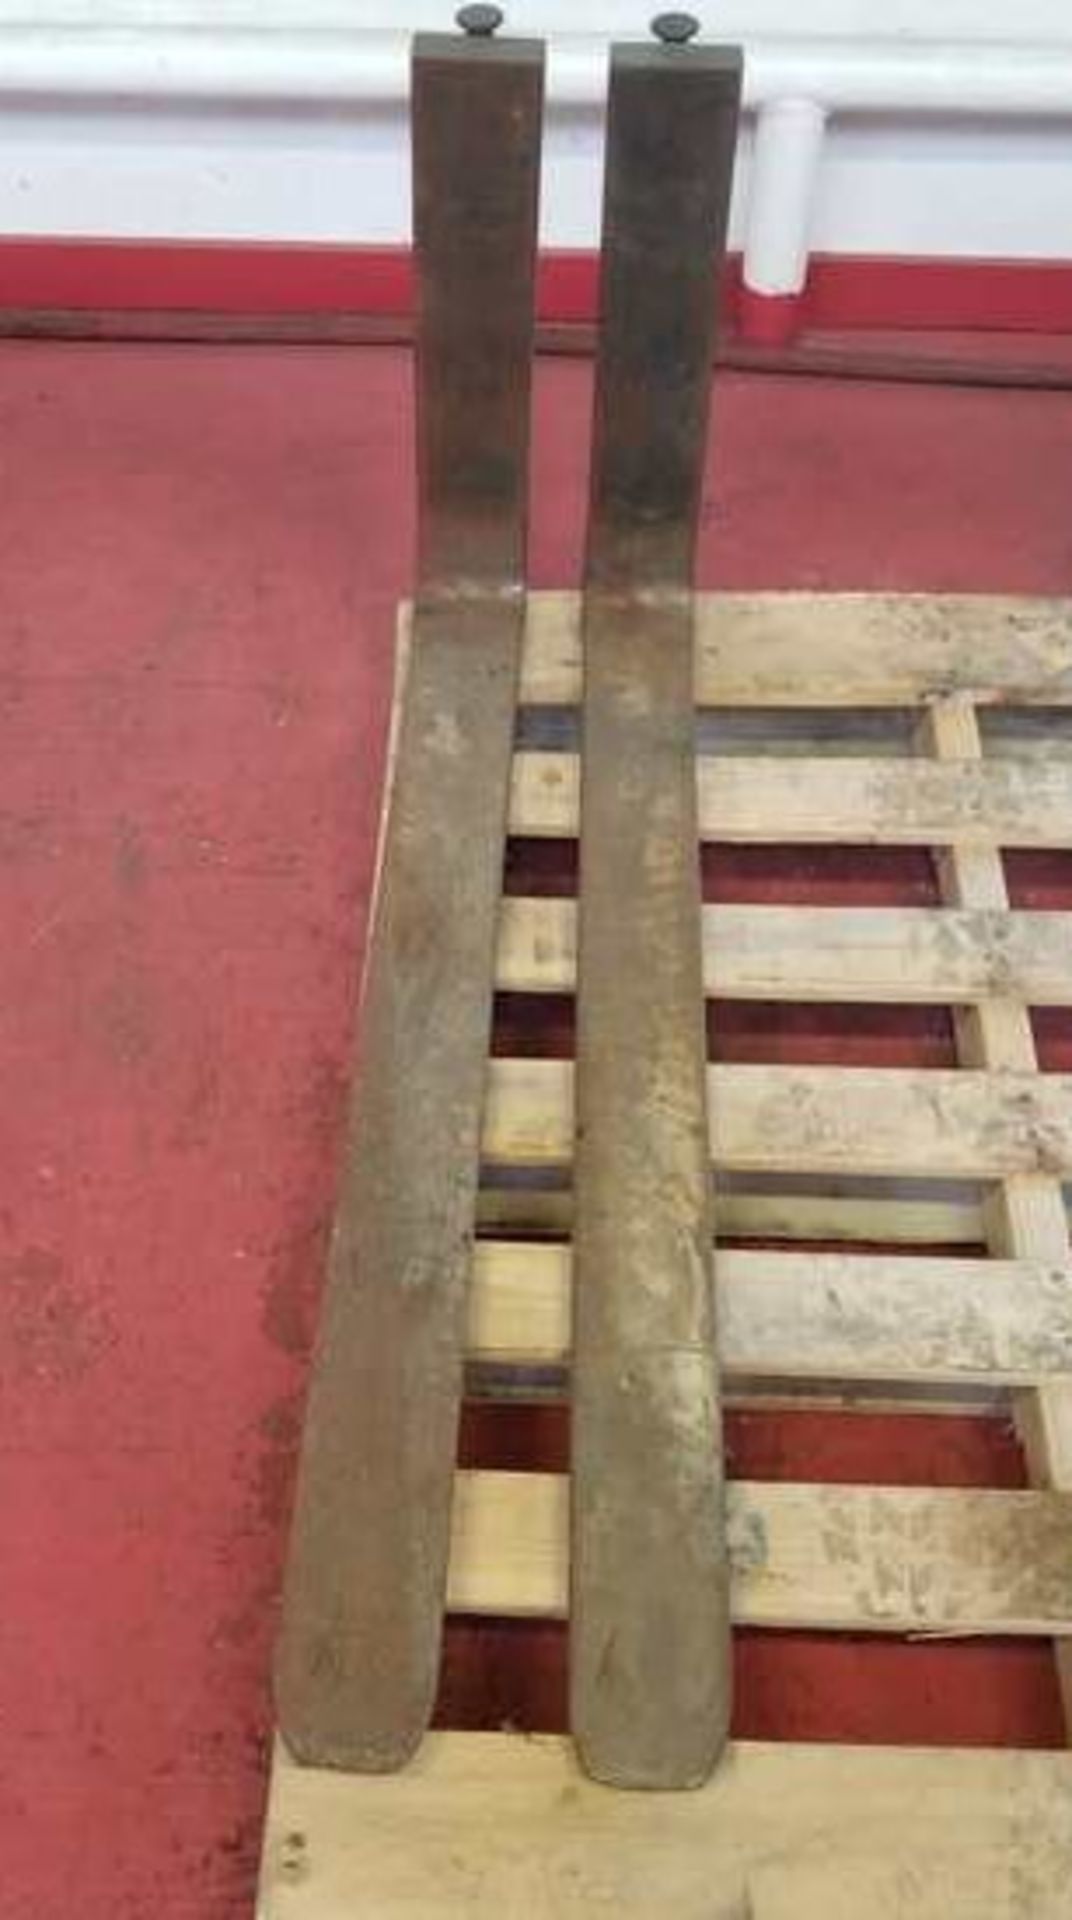 40"L x 4"W forks for forklift. With locking detents. Slide on to bars with 16" spacing. Good